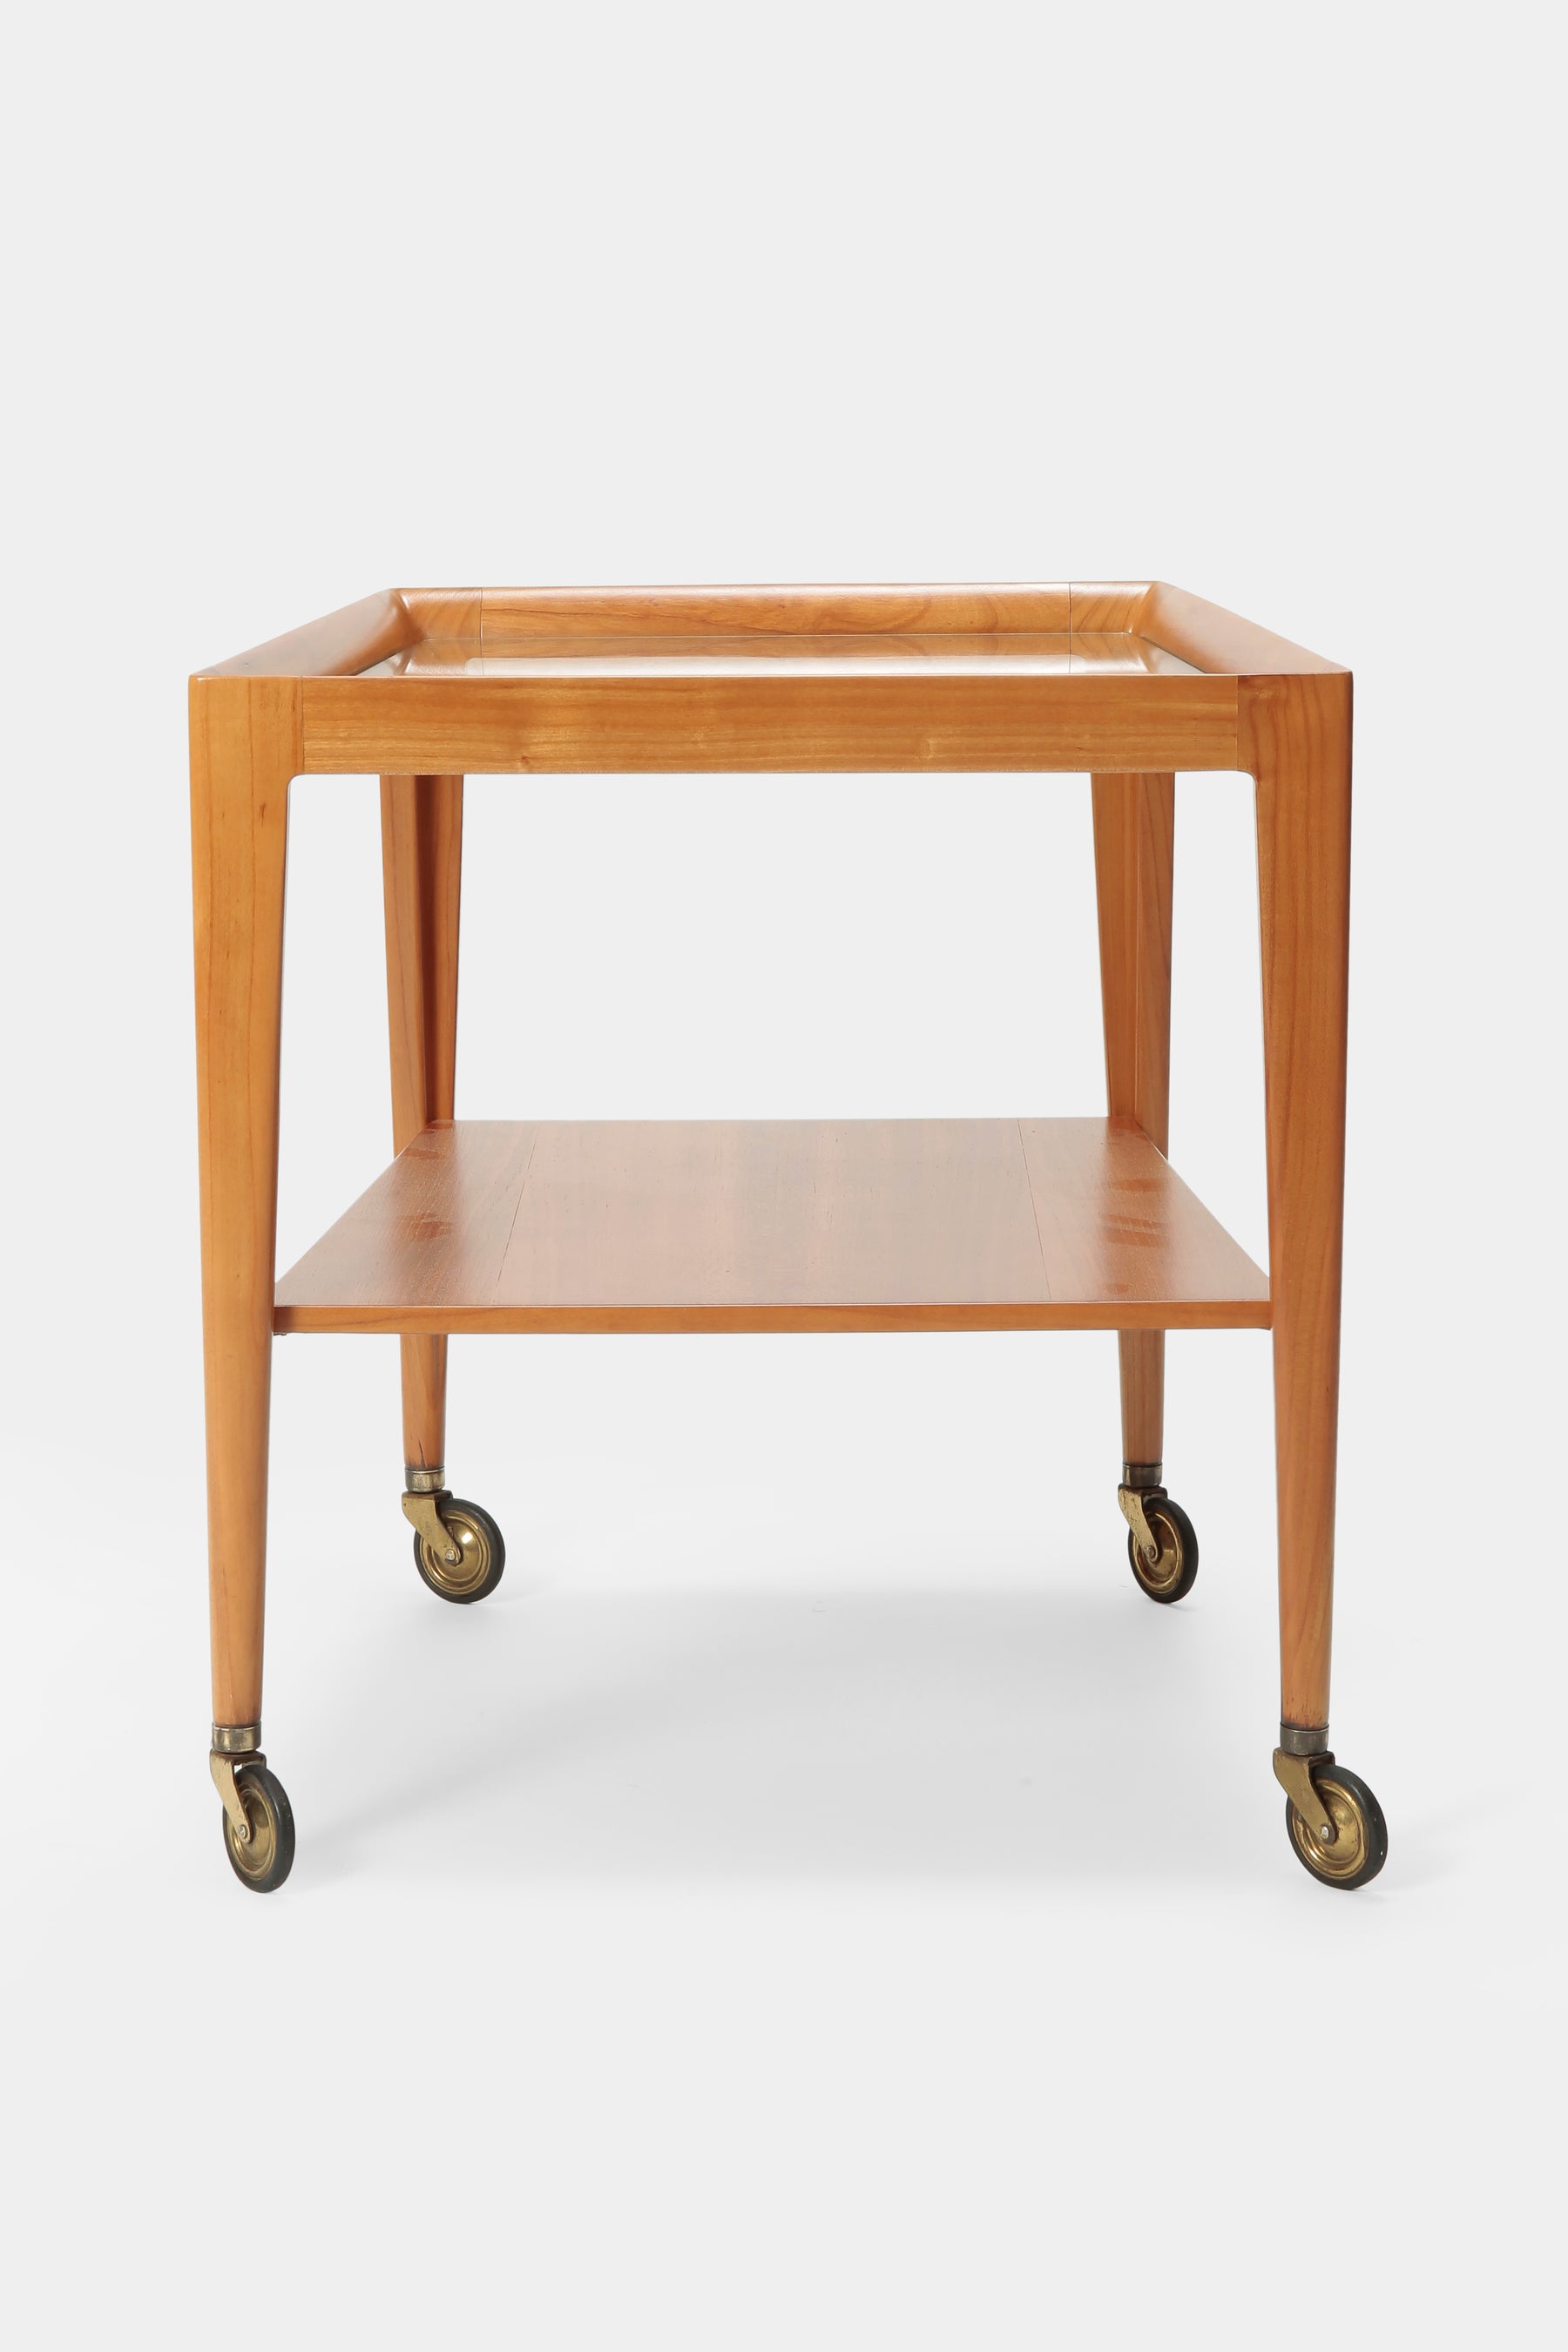 Cherry wood Serving Trolley, Walter Knorr, 1960s